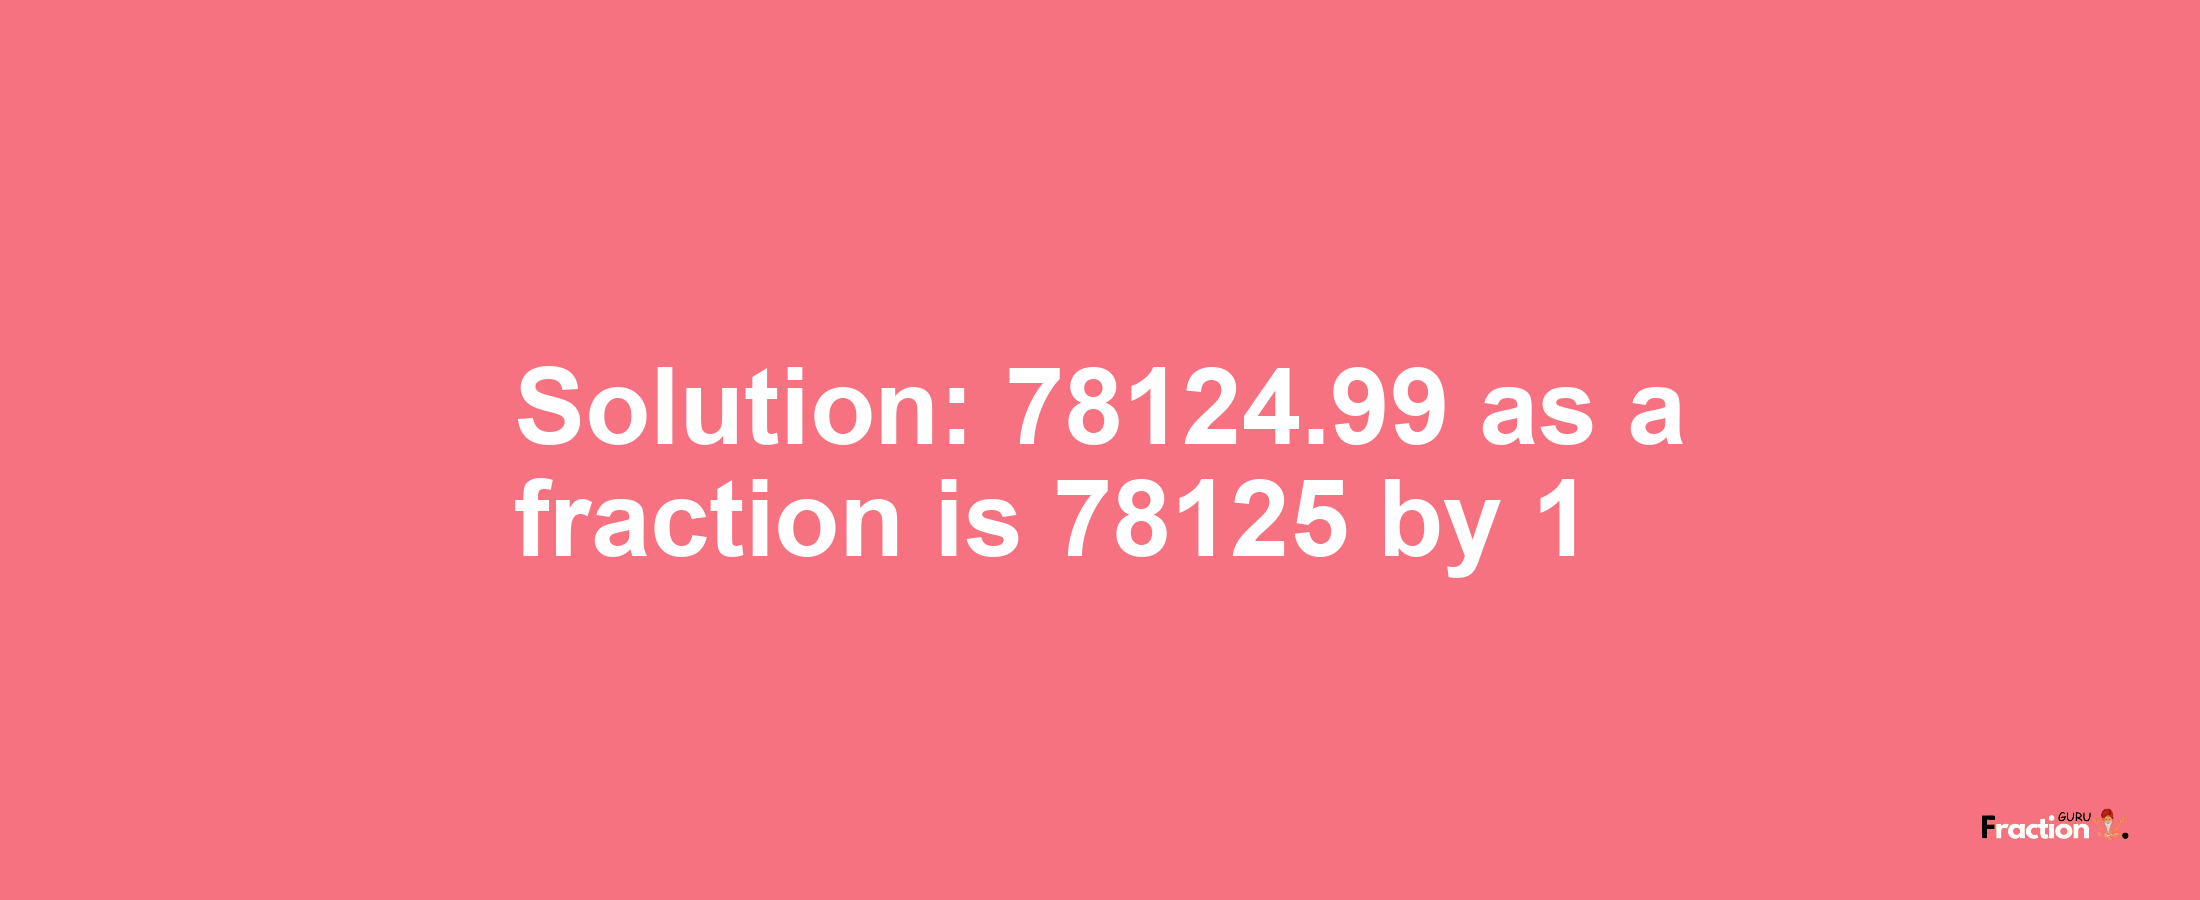 Solution:78124.99 as a fraction is 78125/1